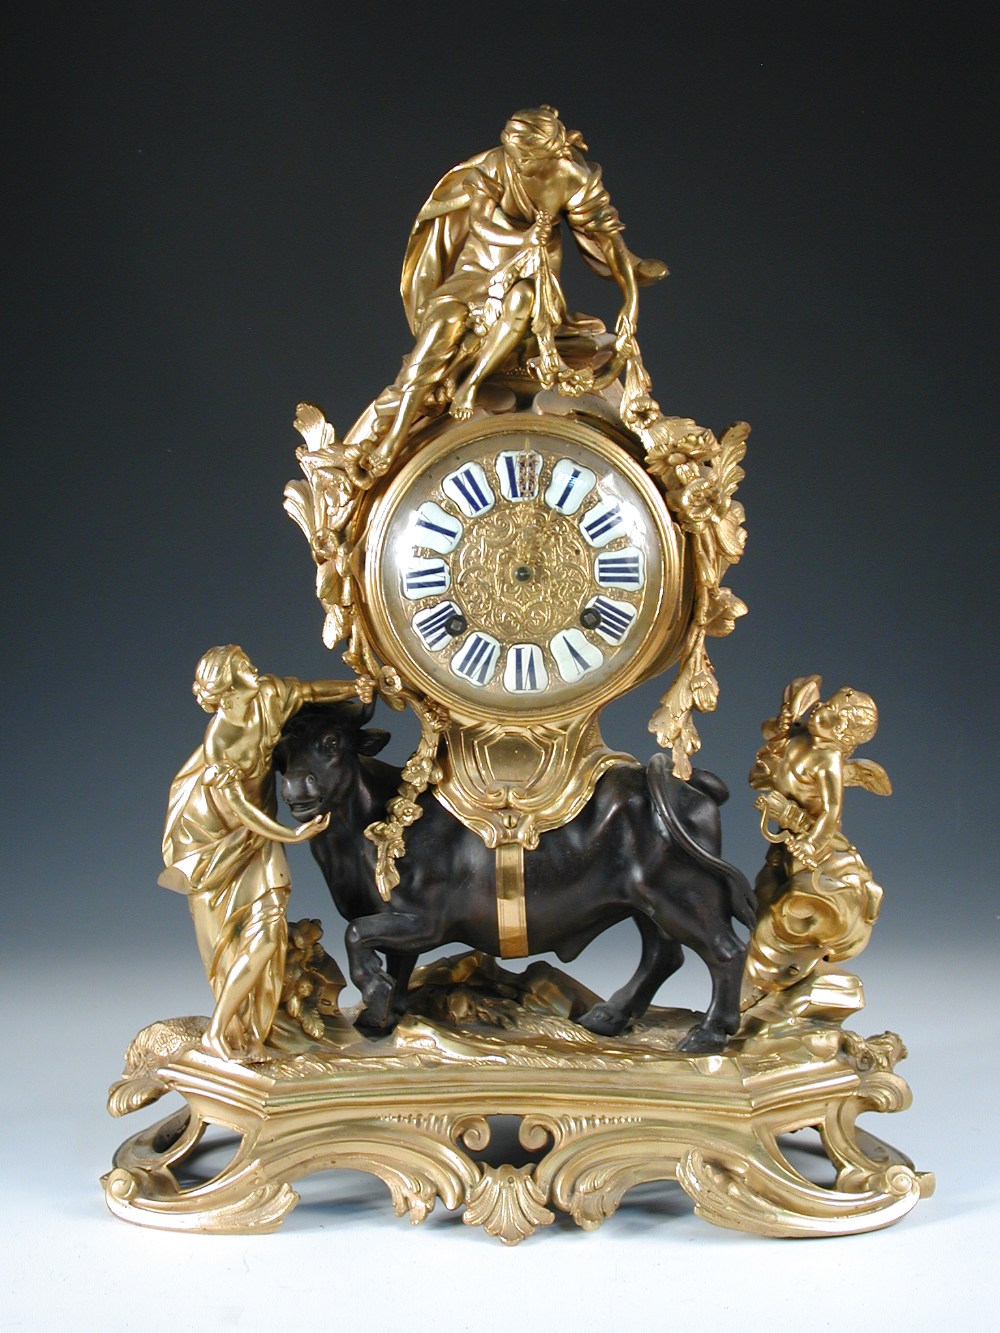 A French 18th/19th century ormolu and bronze mantel clock modelled as Europa and the Bull, quarter